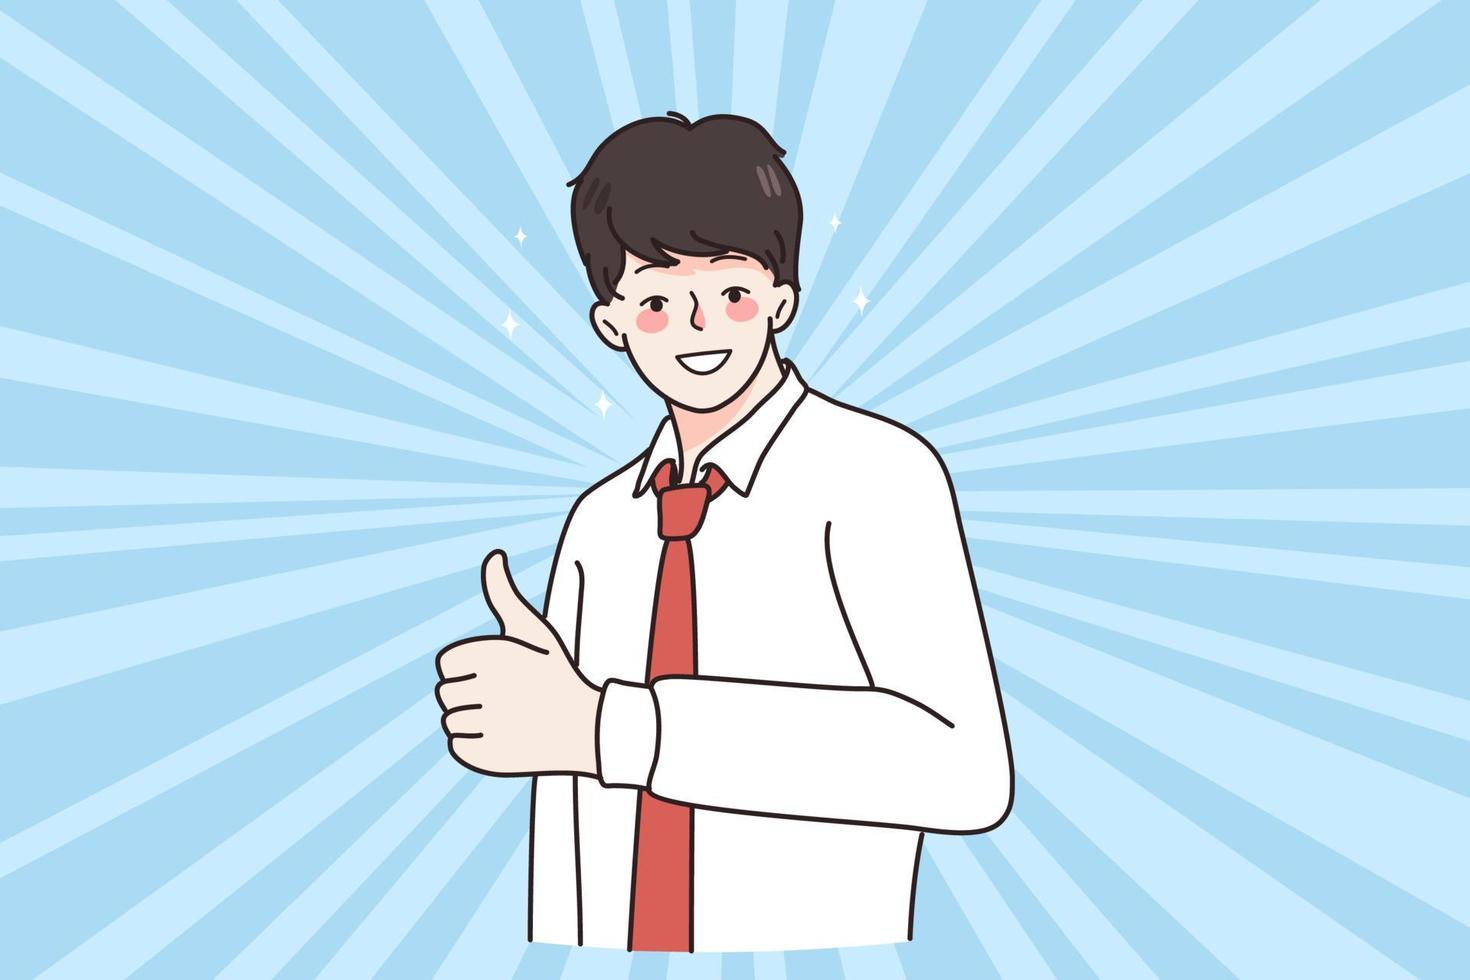 Gesture sign and thumb up concept. Young smiling businessman wearing white shirt standing and showing thumb up sign with hands fingers vector illustration